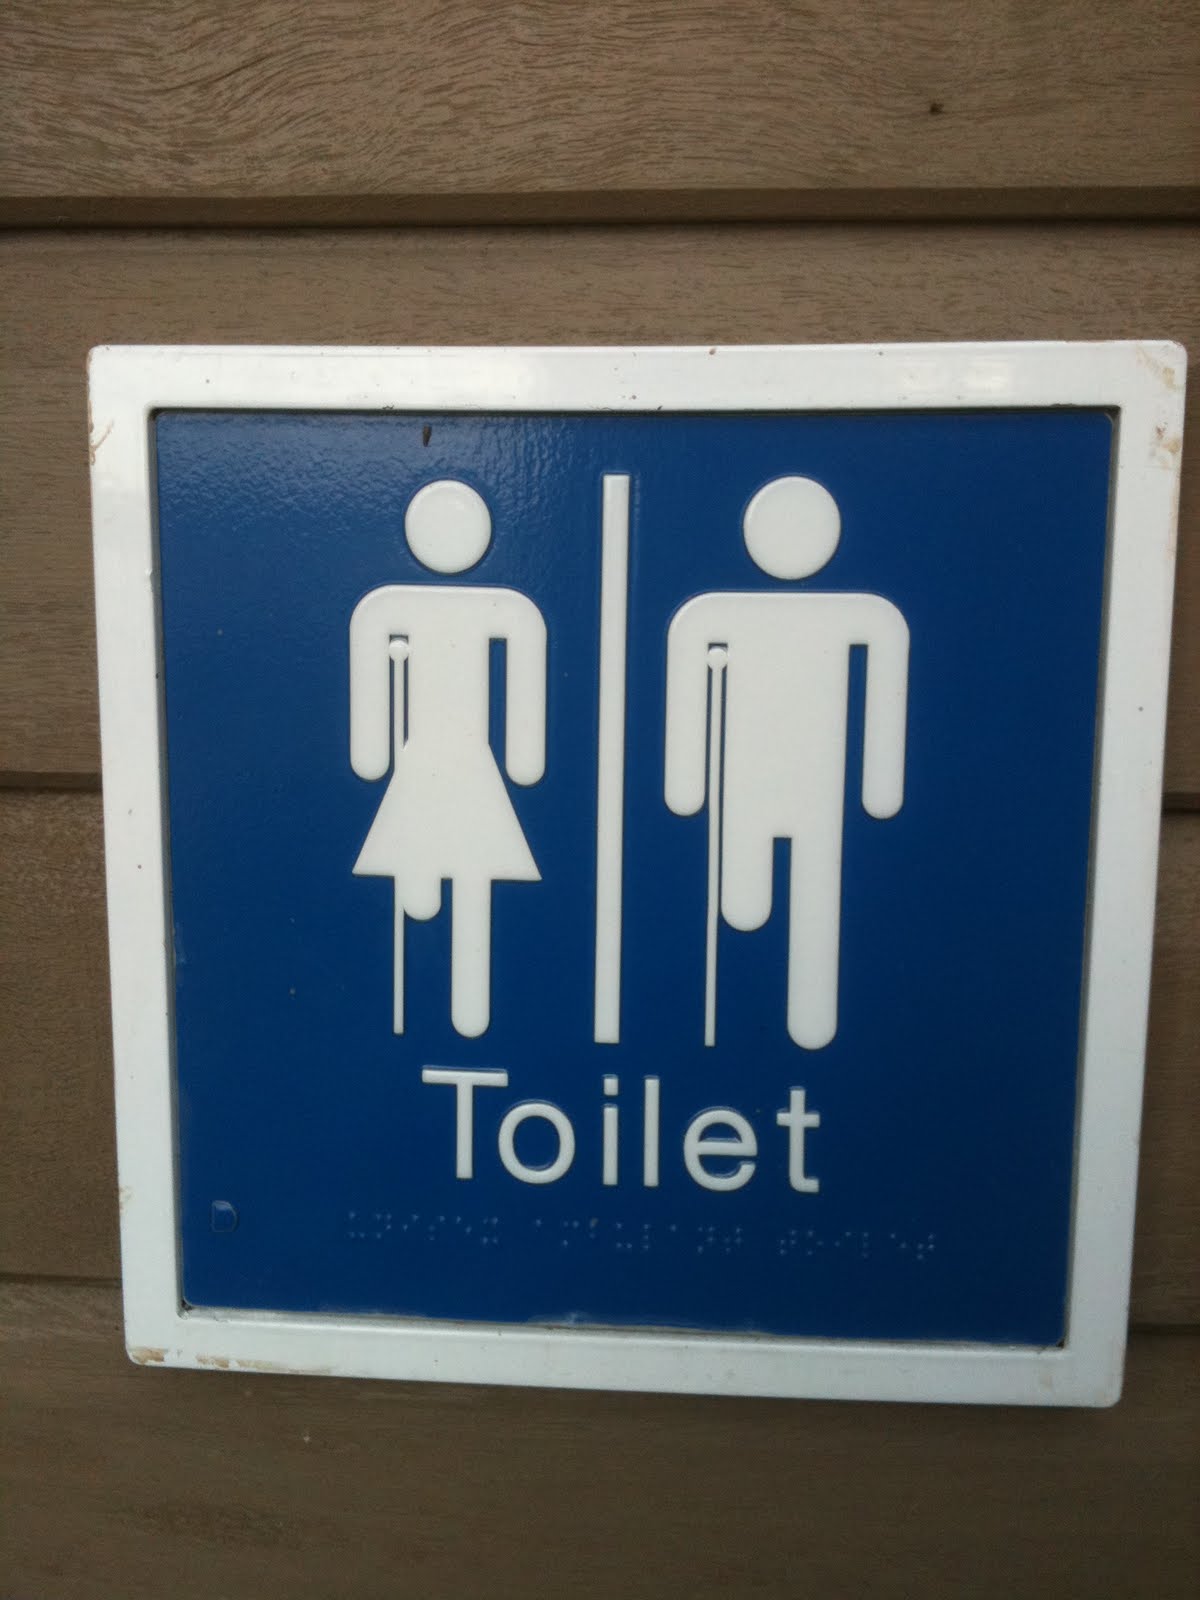 SEXY Girls: Funny toilet signs